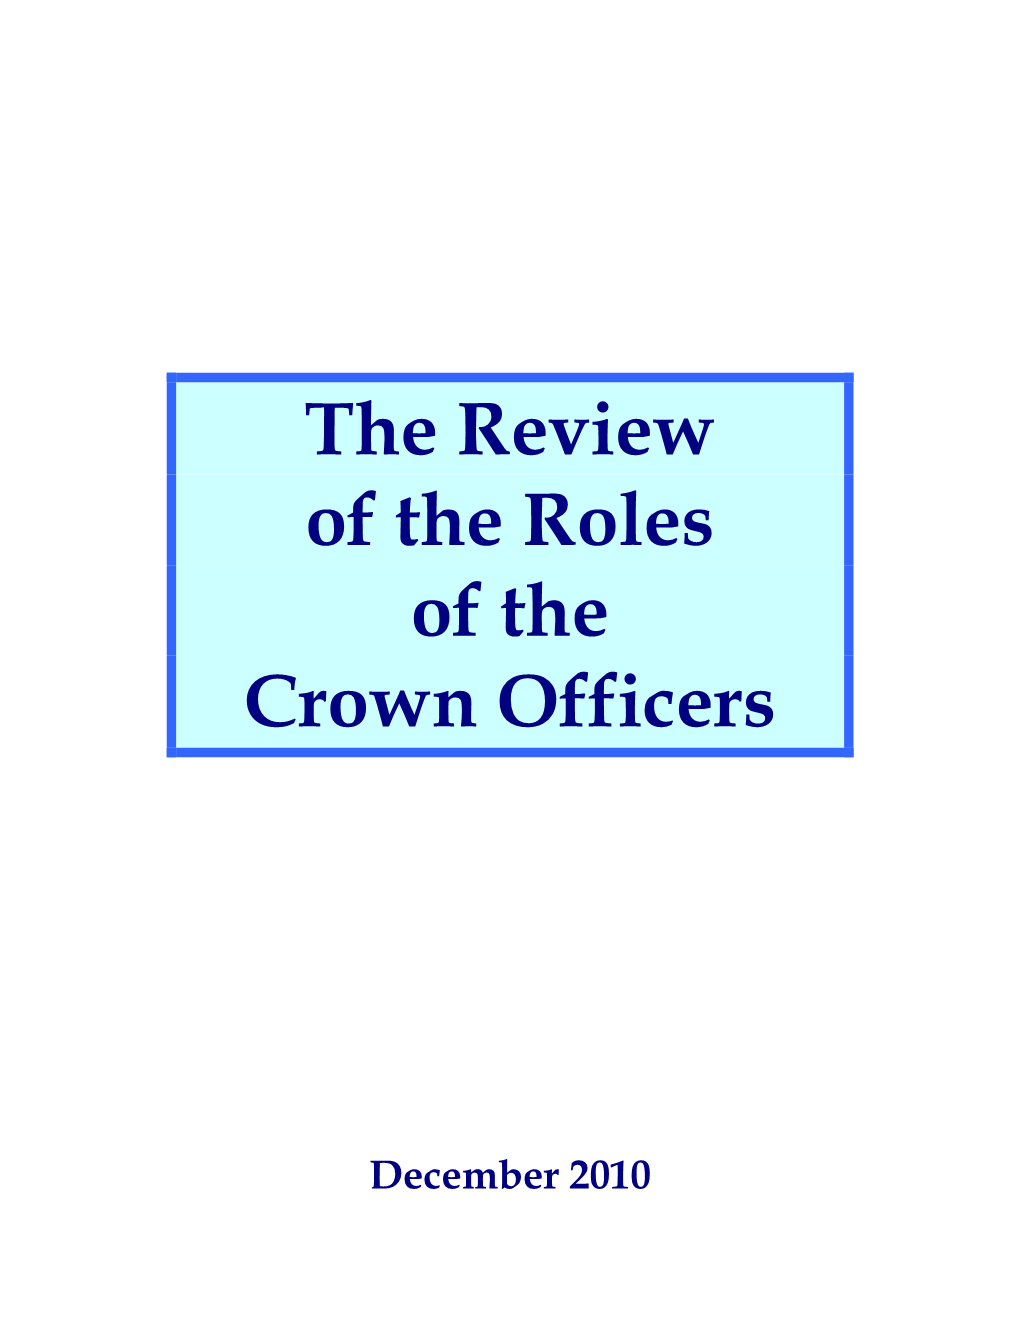 The Review of the Roles of the Crown Officers